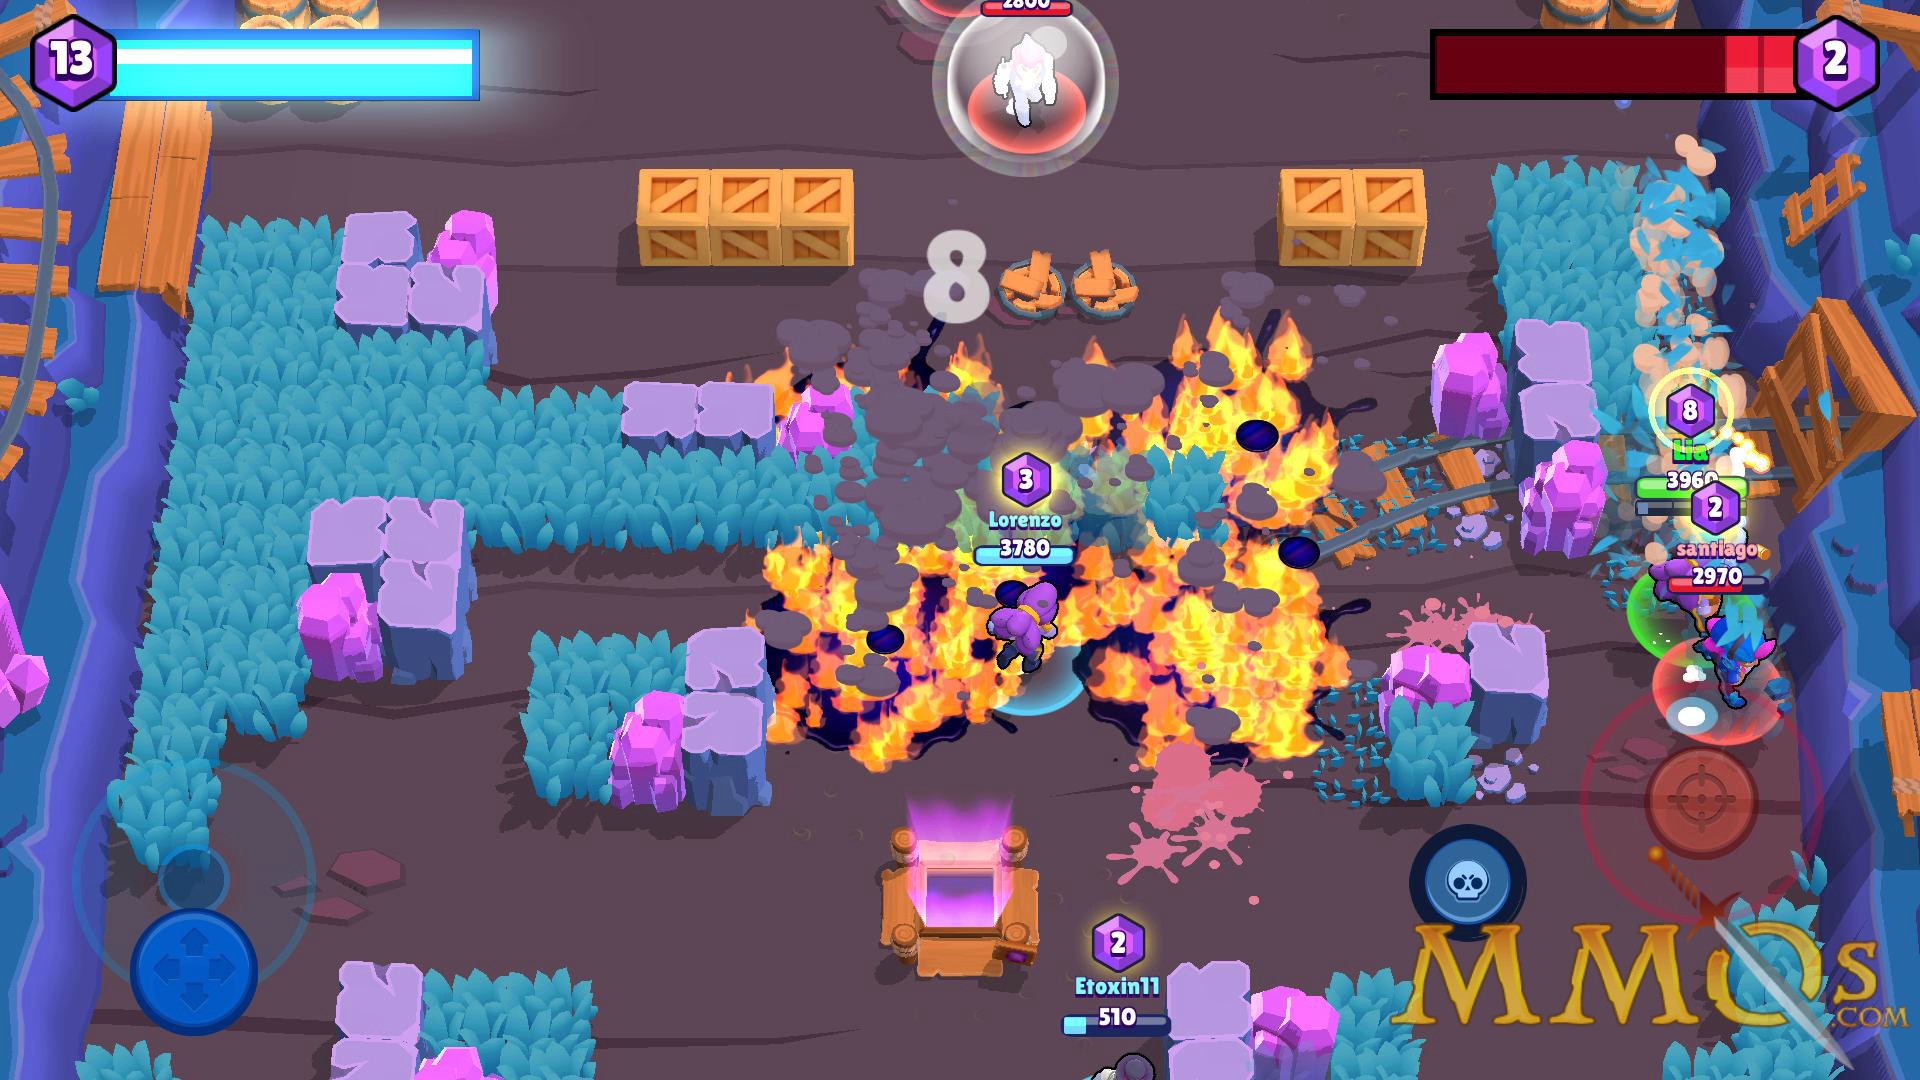 Brawl Stars' developer Supercell has created an Event Site to